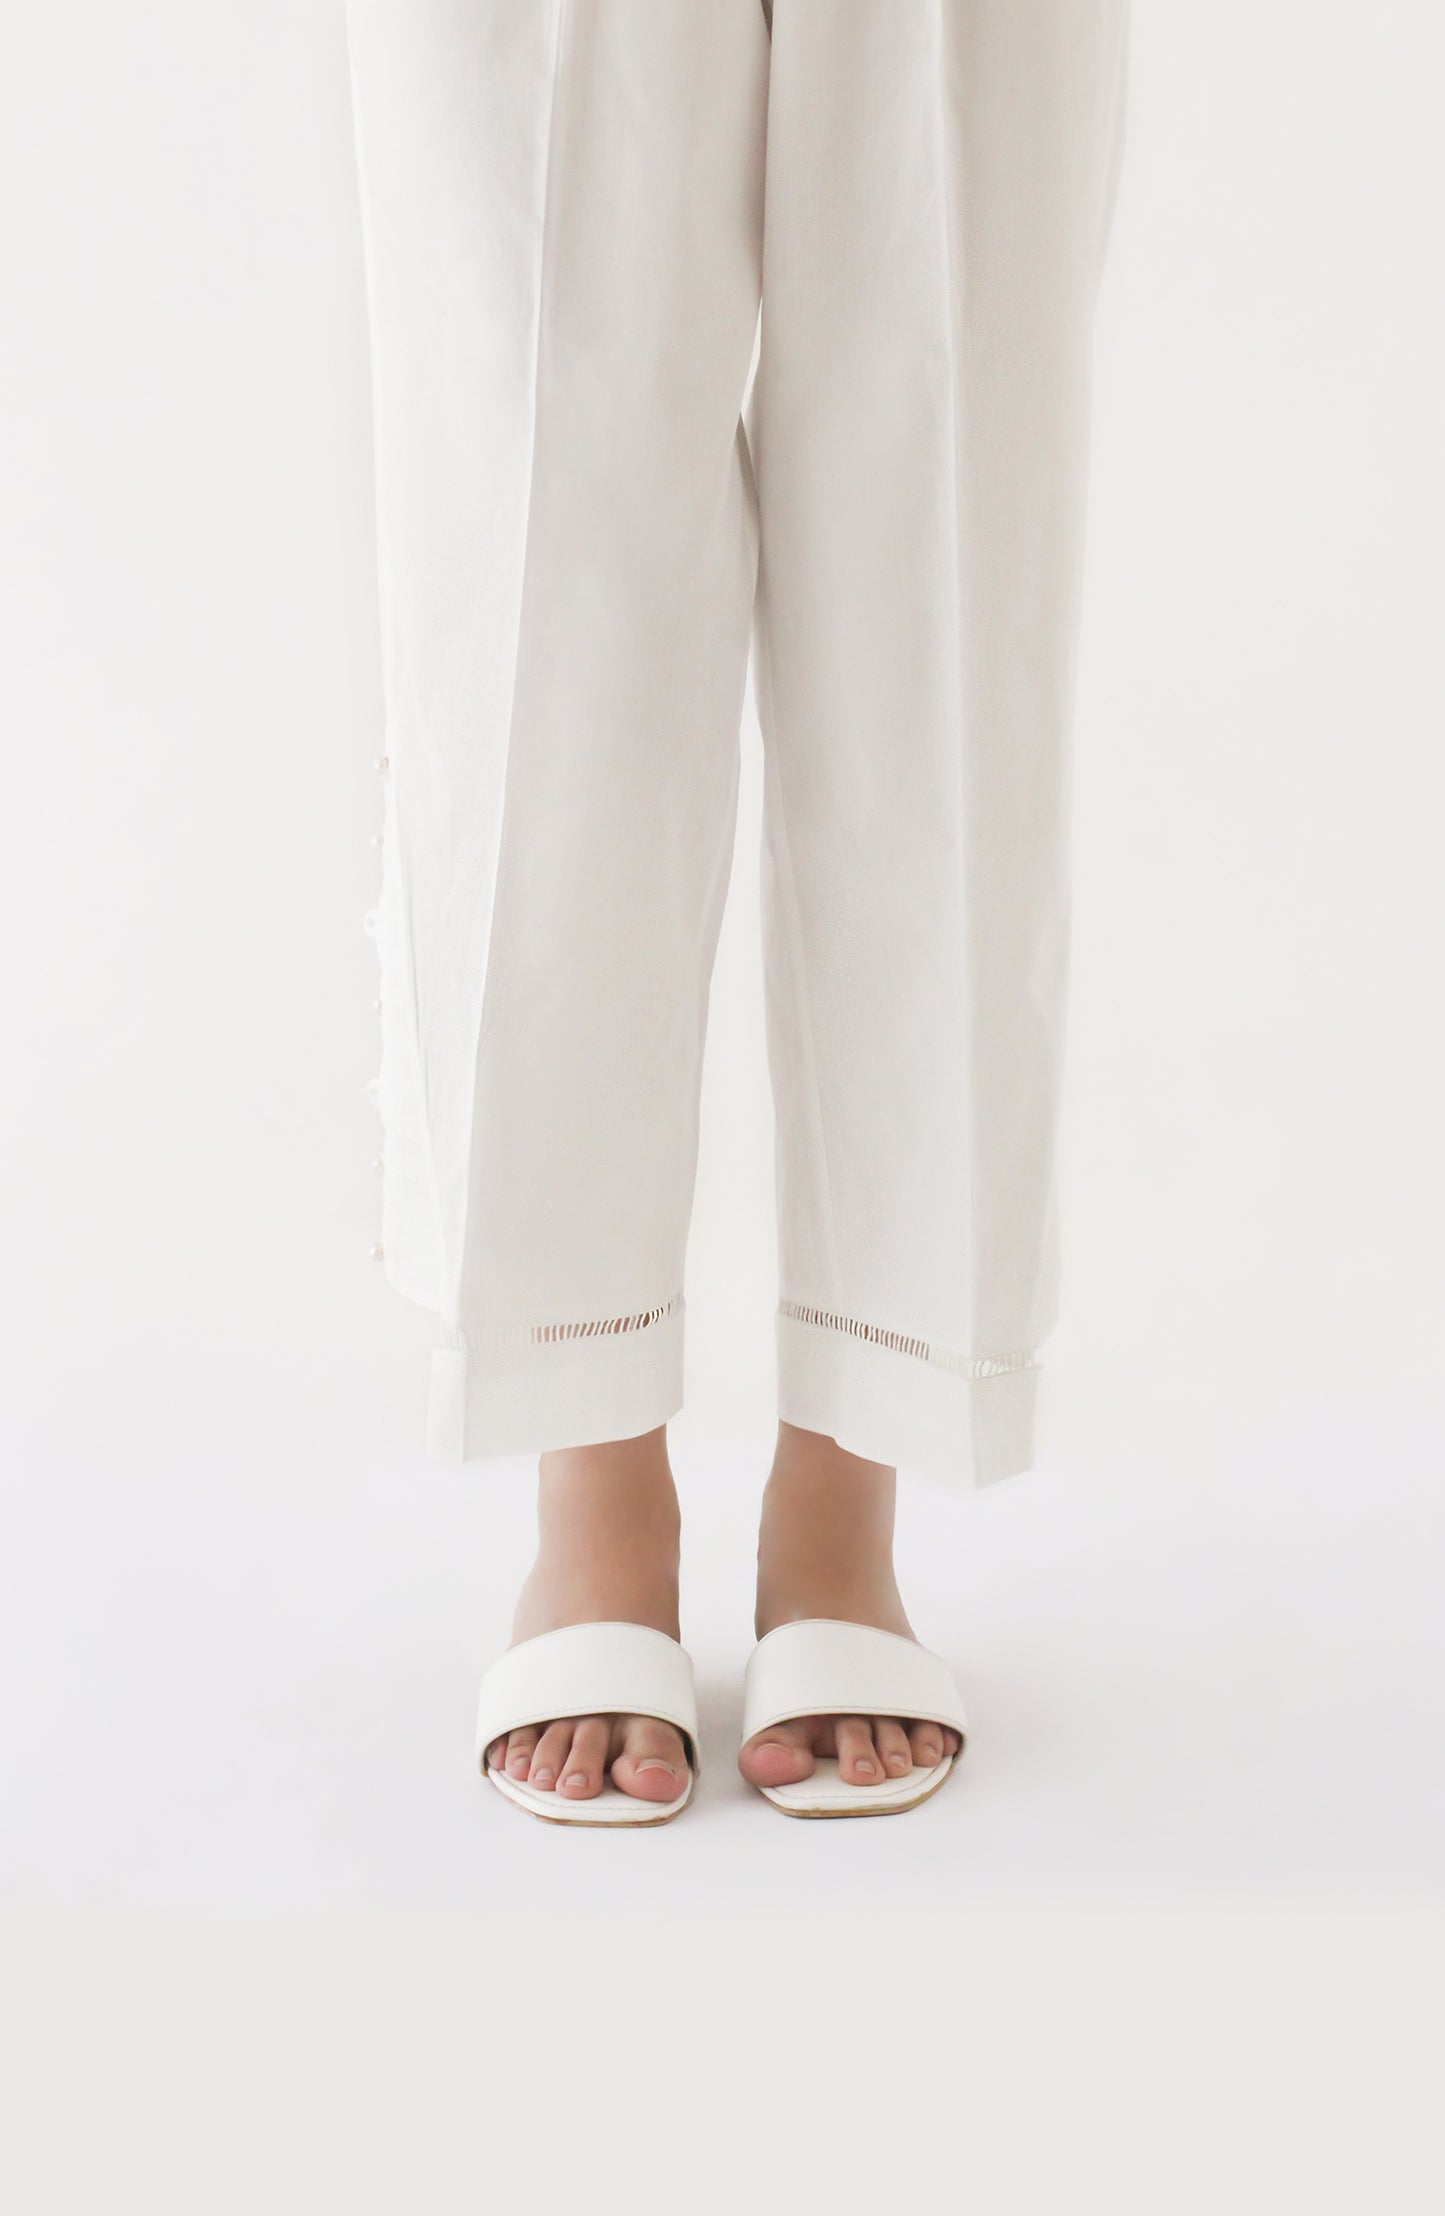 NB-T-P-22-001 WHITE CAMBRIC SCTROUSER STITCHED BOTTOMS TROUSER